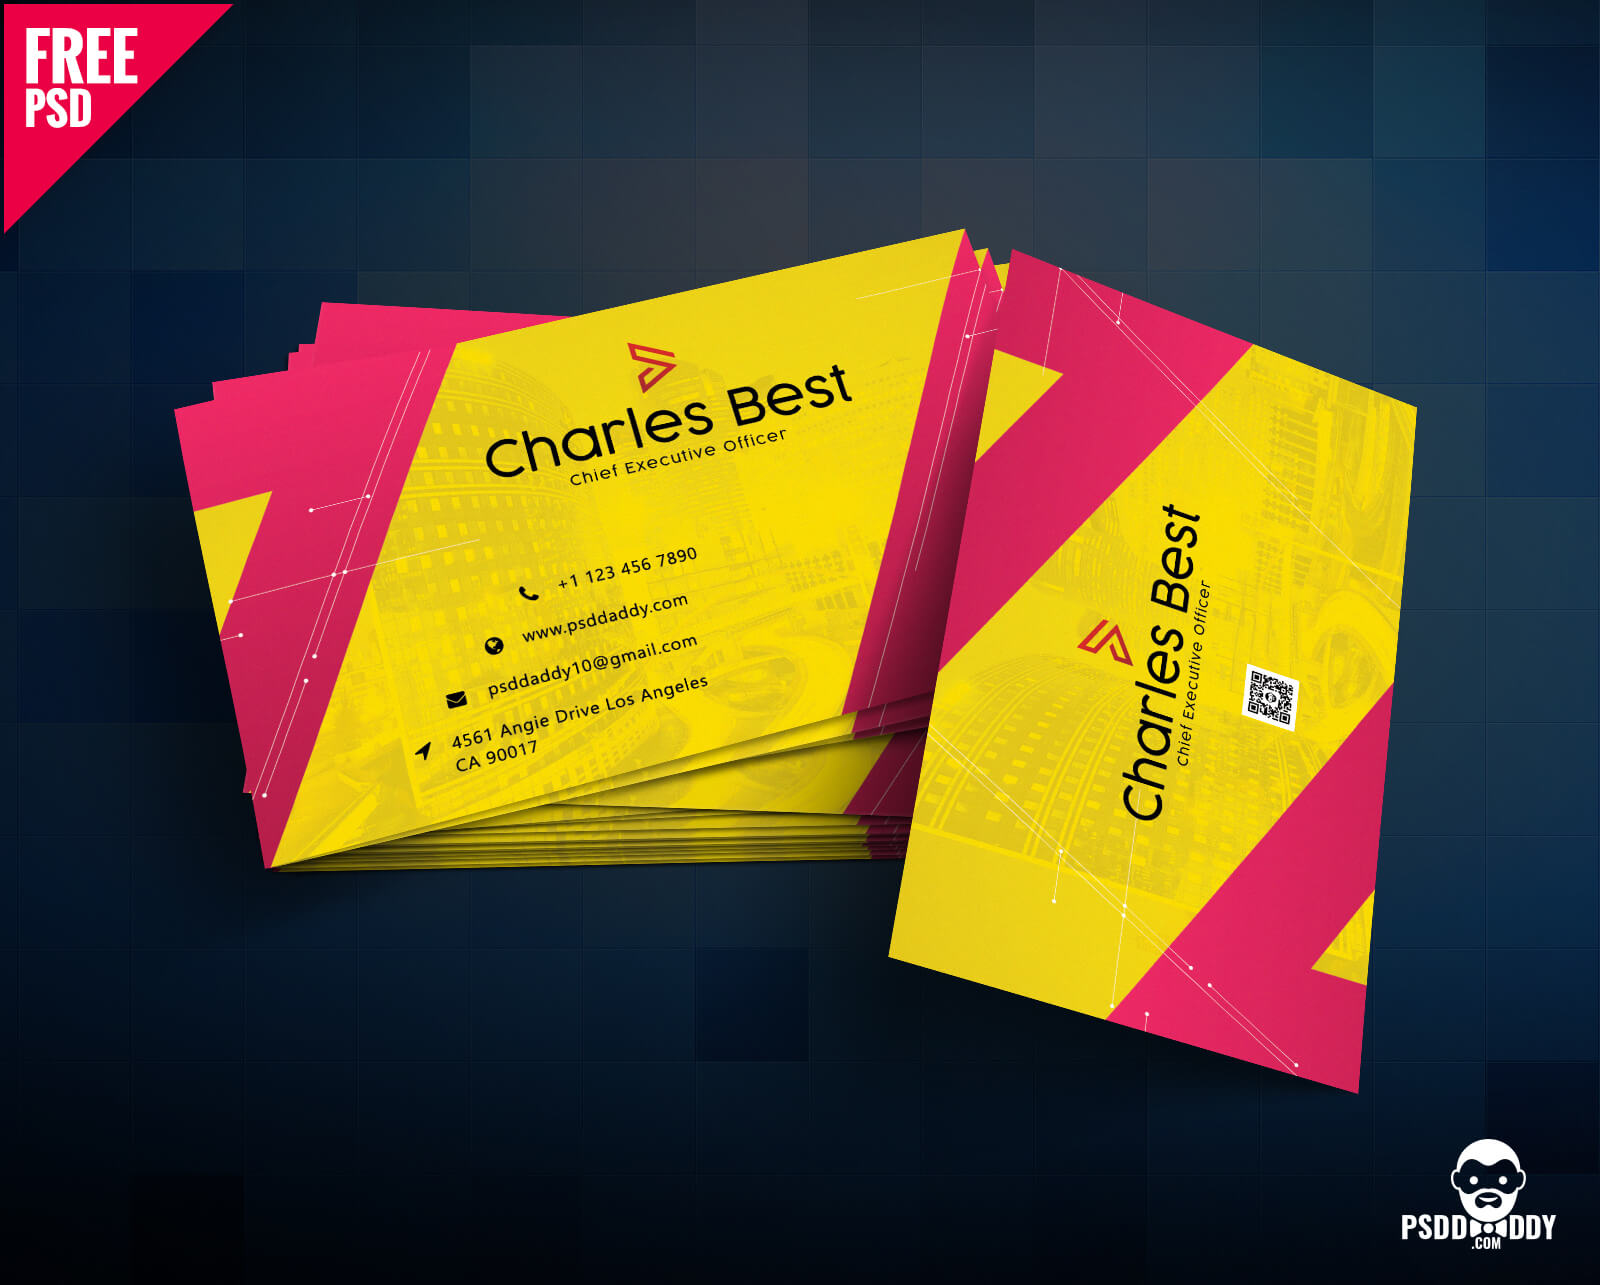 Download] Creative Business Card Free Psd | Psddaddy For Psd Name Card Template